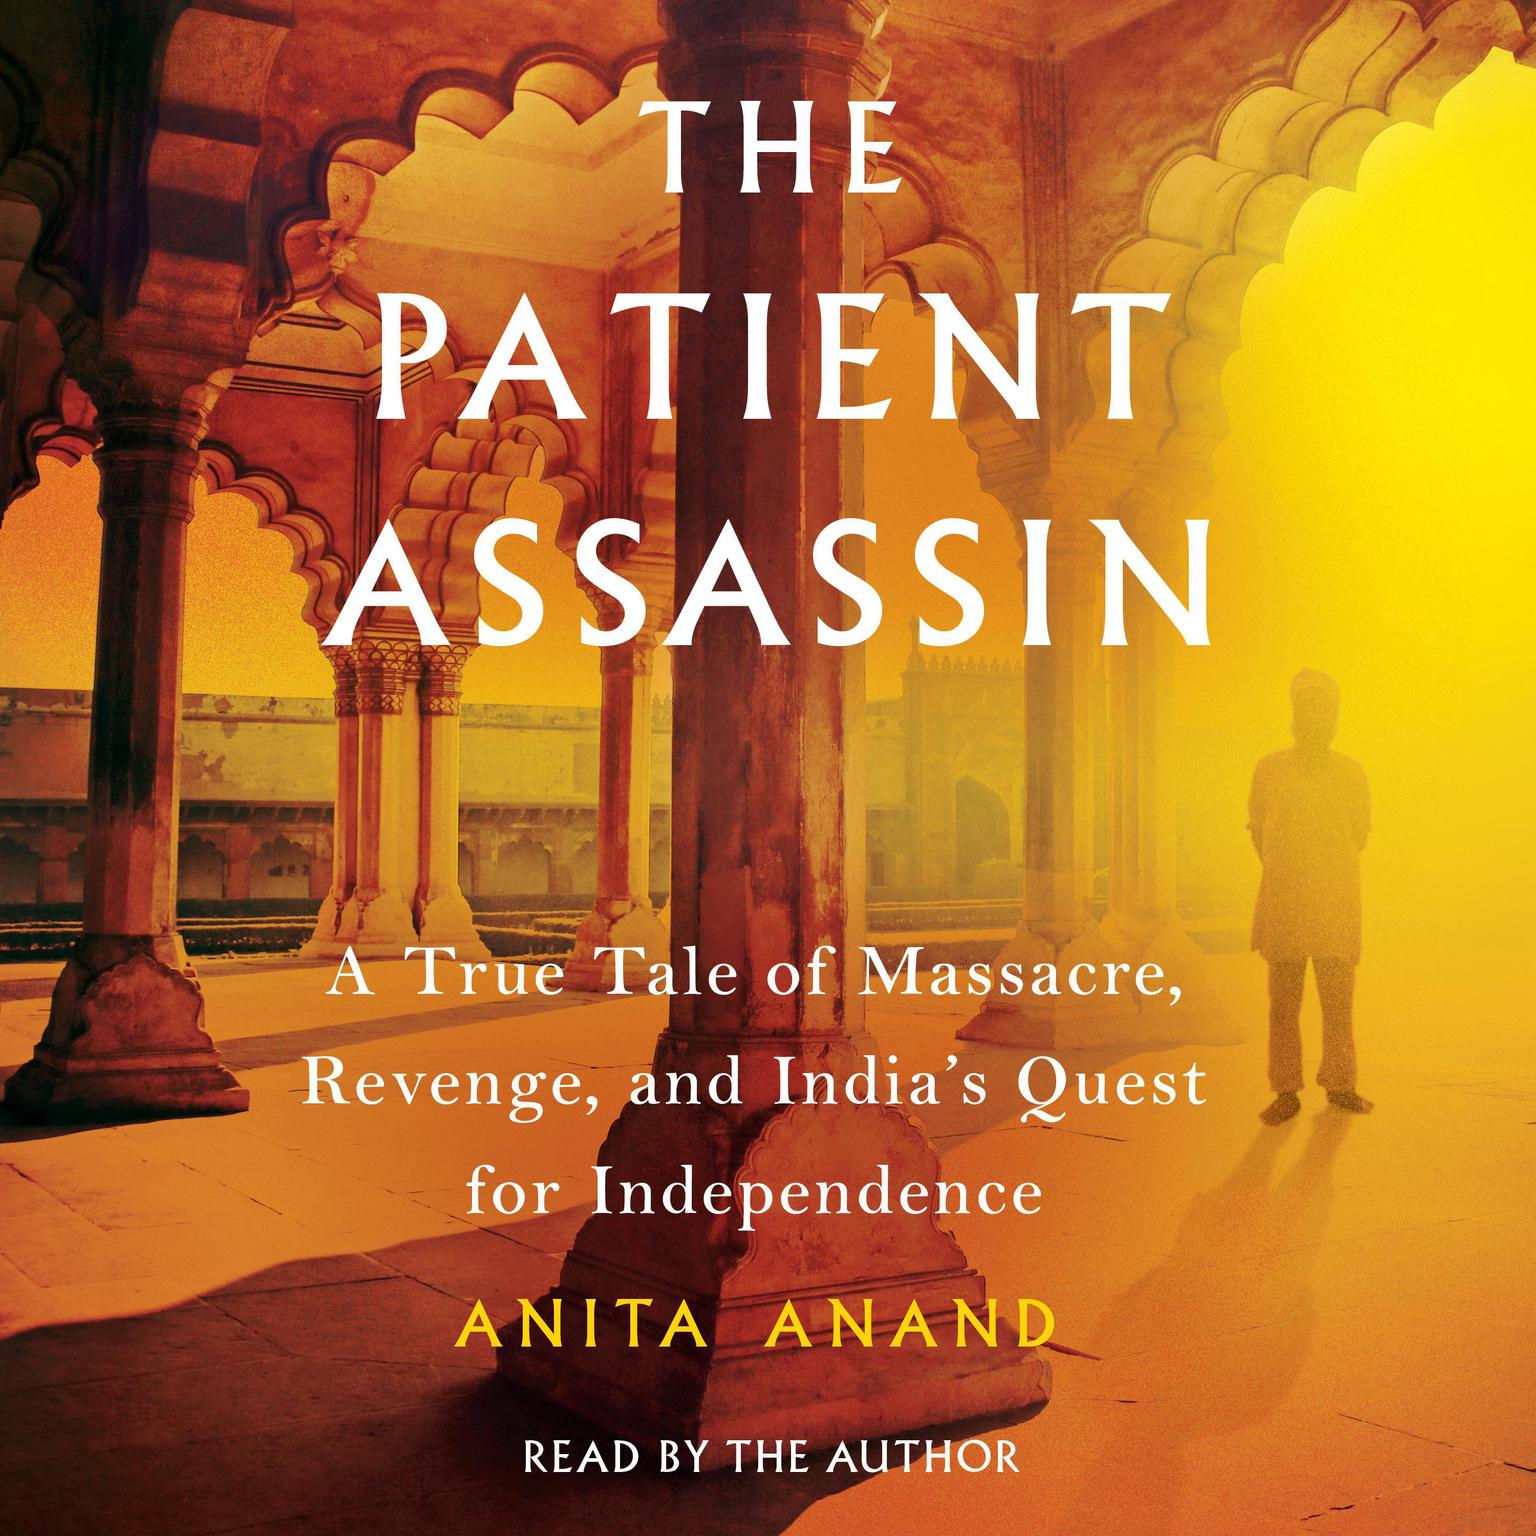 The Patient Assassin: A True Tale of Massacre, Revenge, and Indias Quest for Independence Audiobook, by Anita Anand